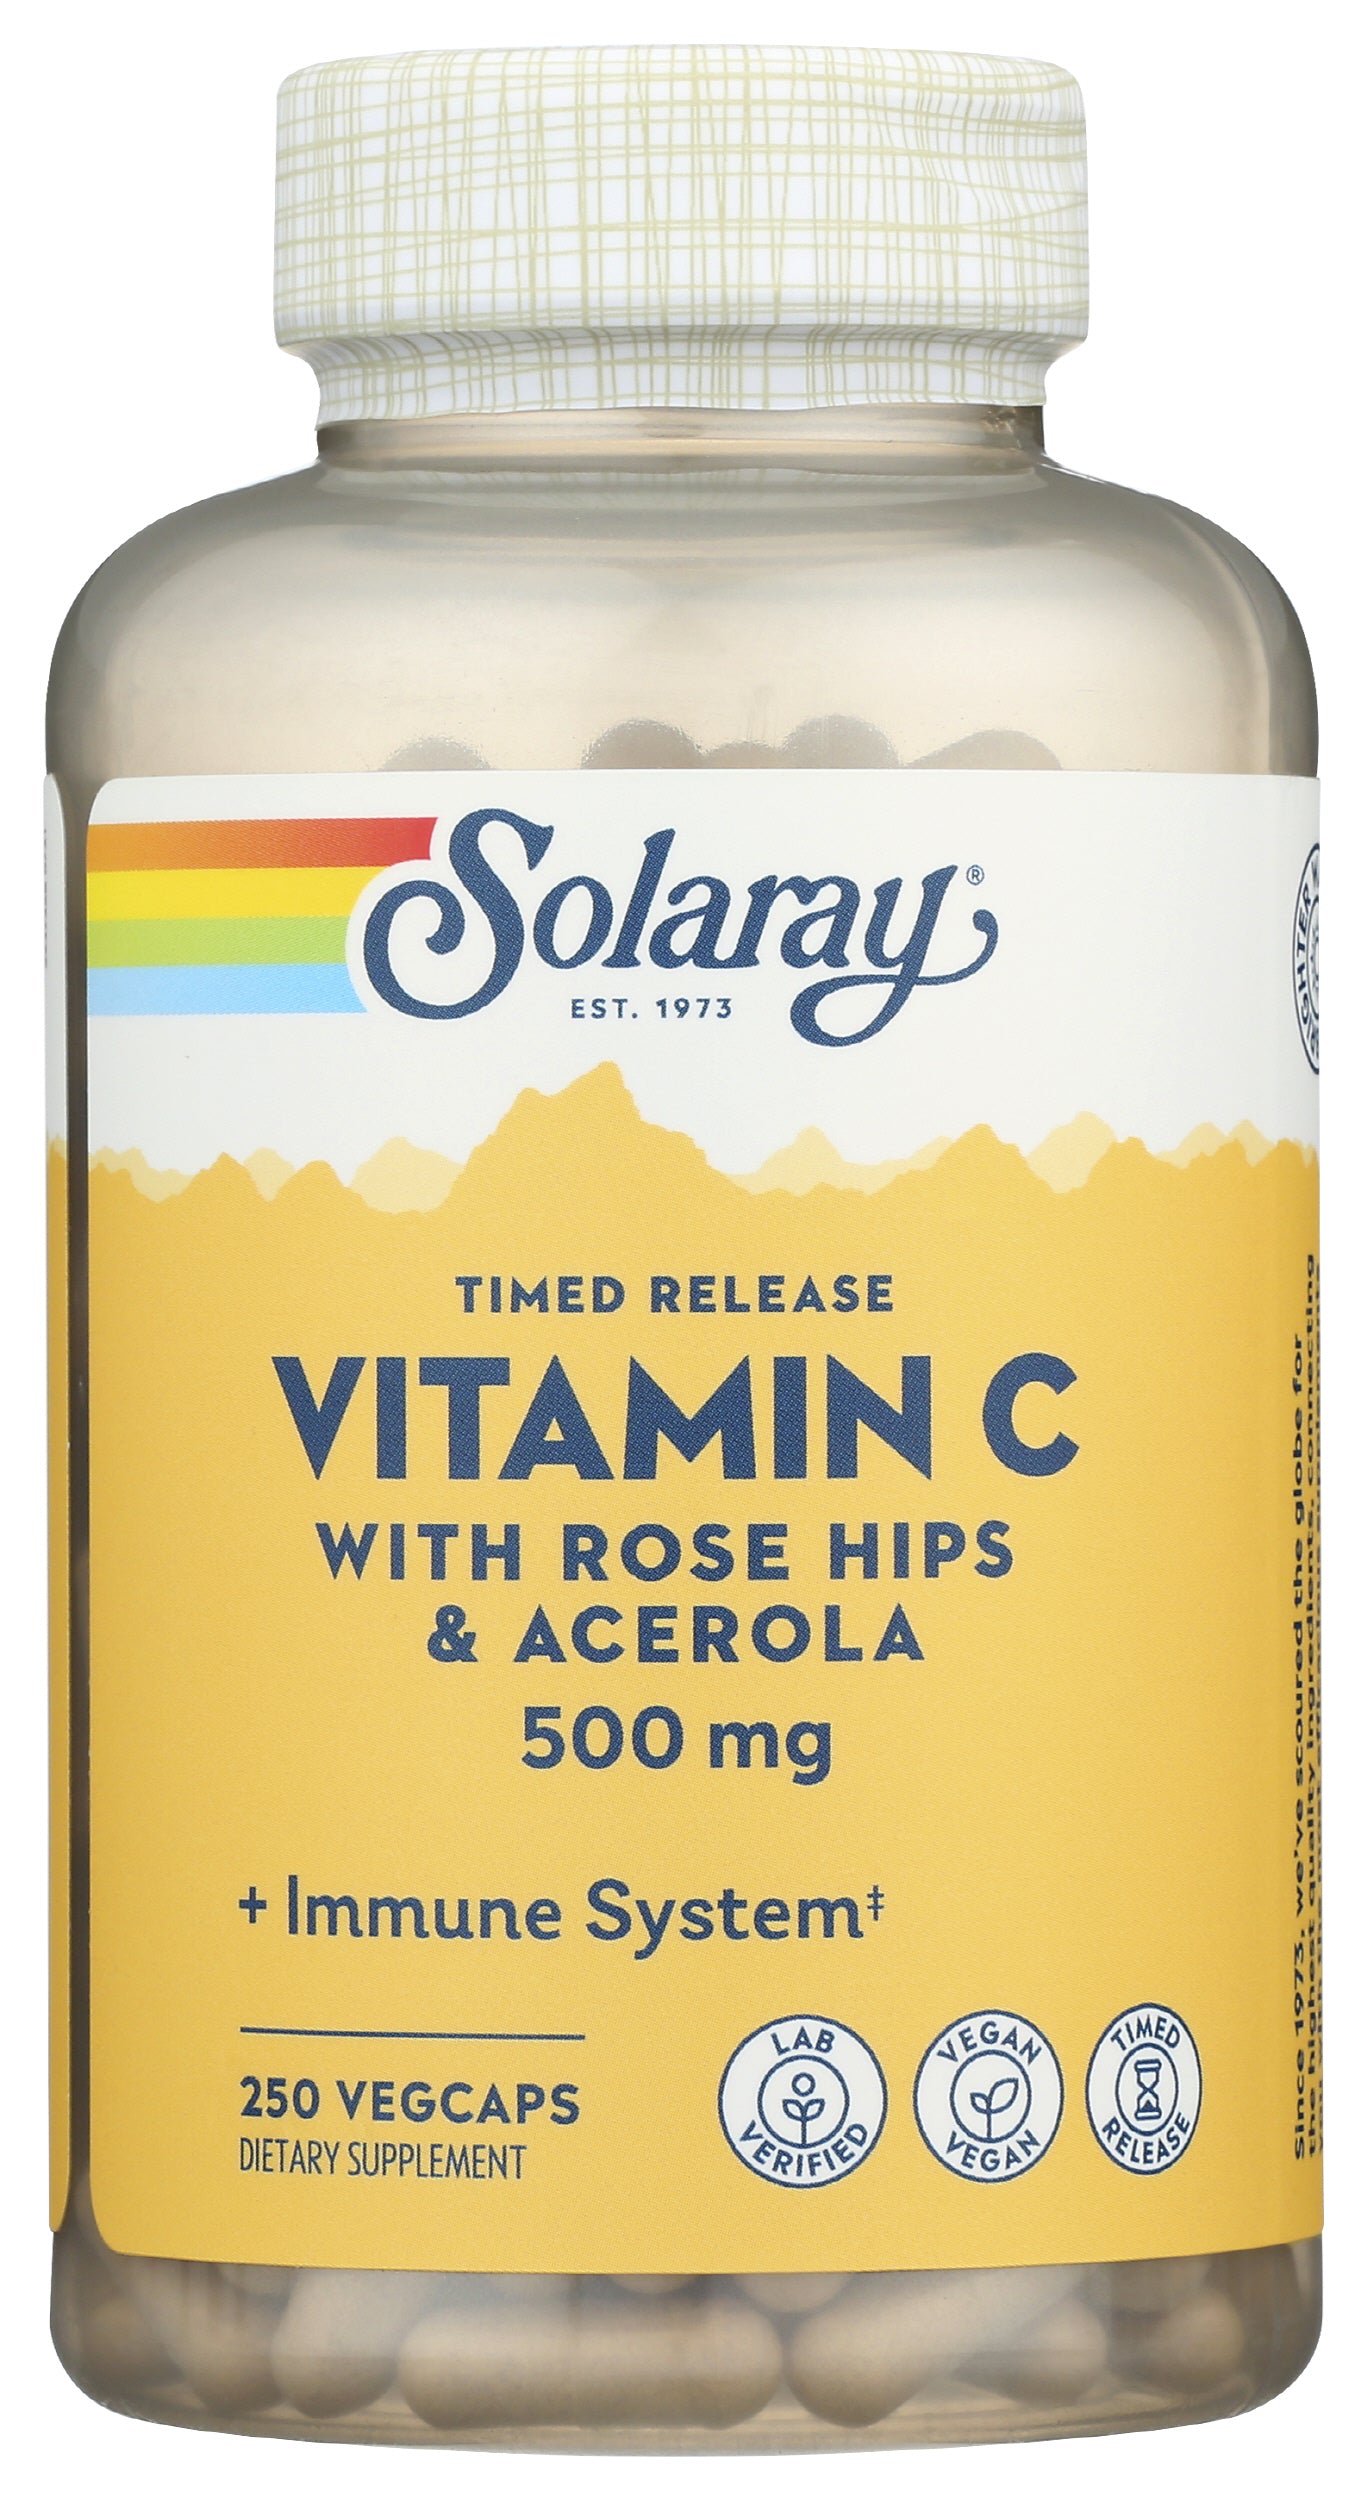 Solaray Timed Release Vitamin C with Rose Hips & Acerola 500mg 250 VegCaps Front of Bottle